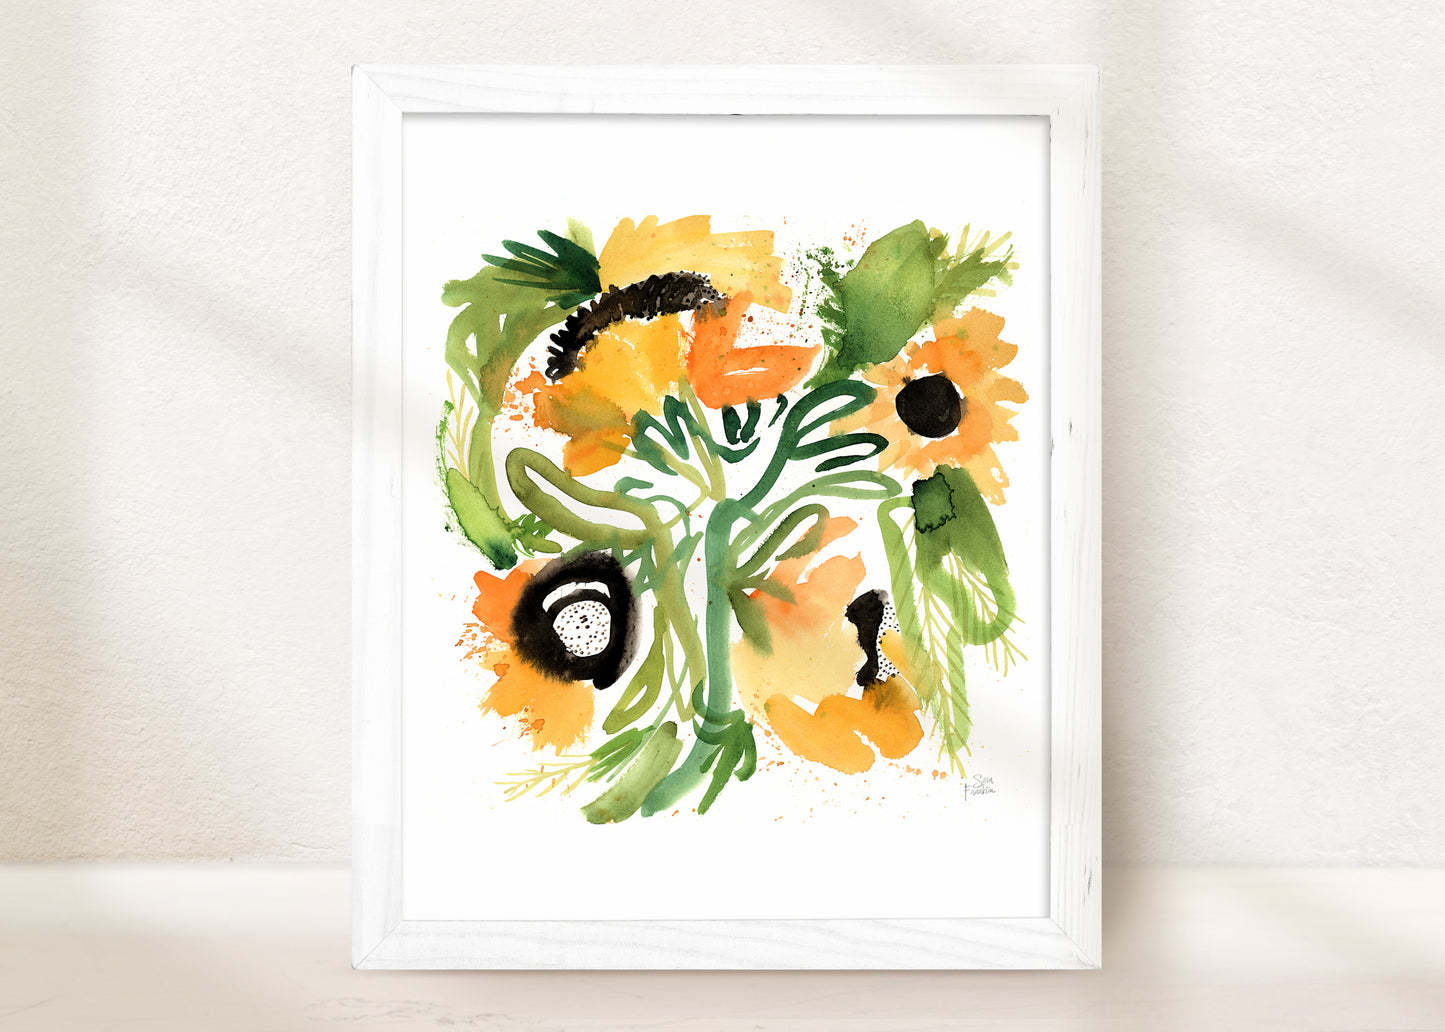 Beyond The Meadows Florals Diptych Art Print Set of 2 by Sara Franklin